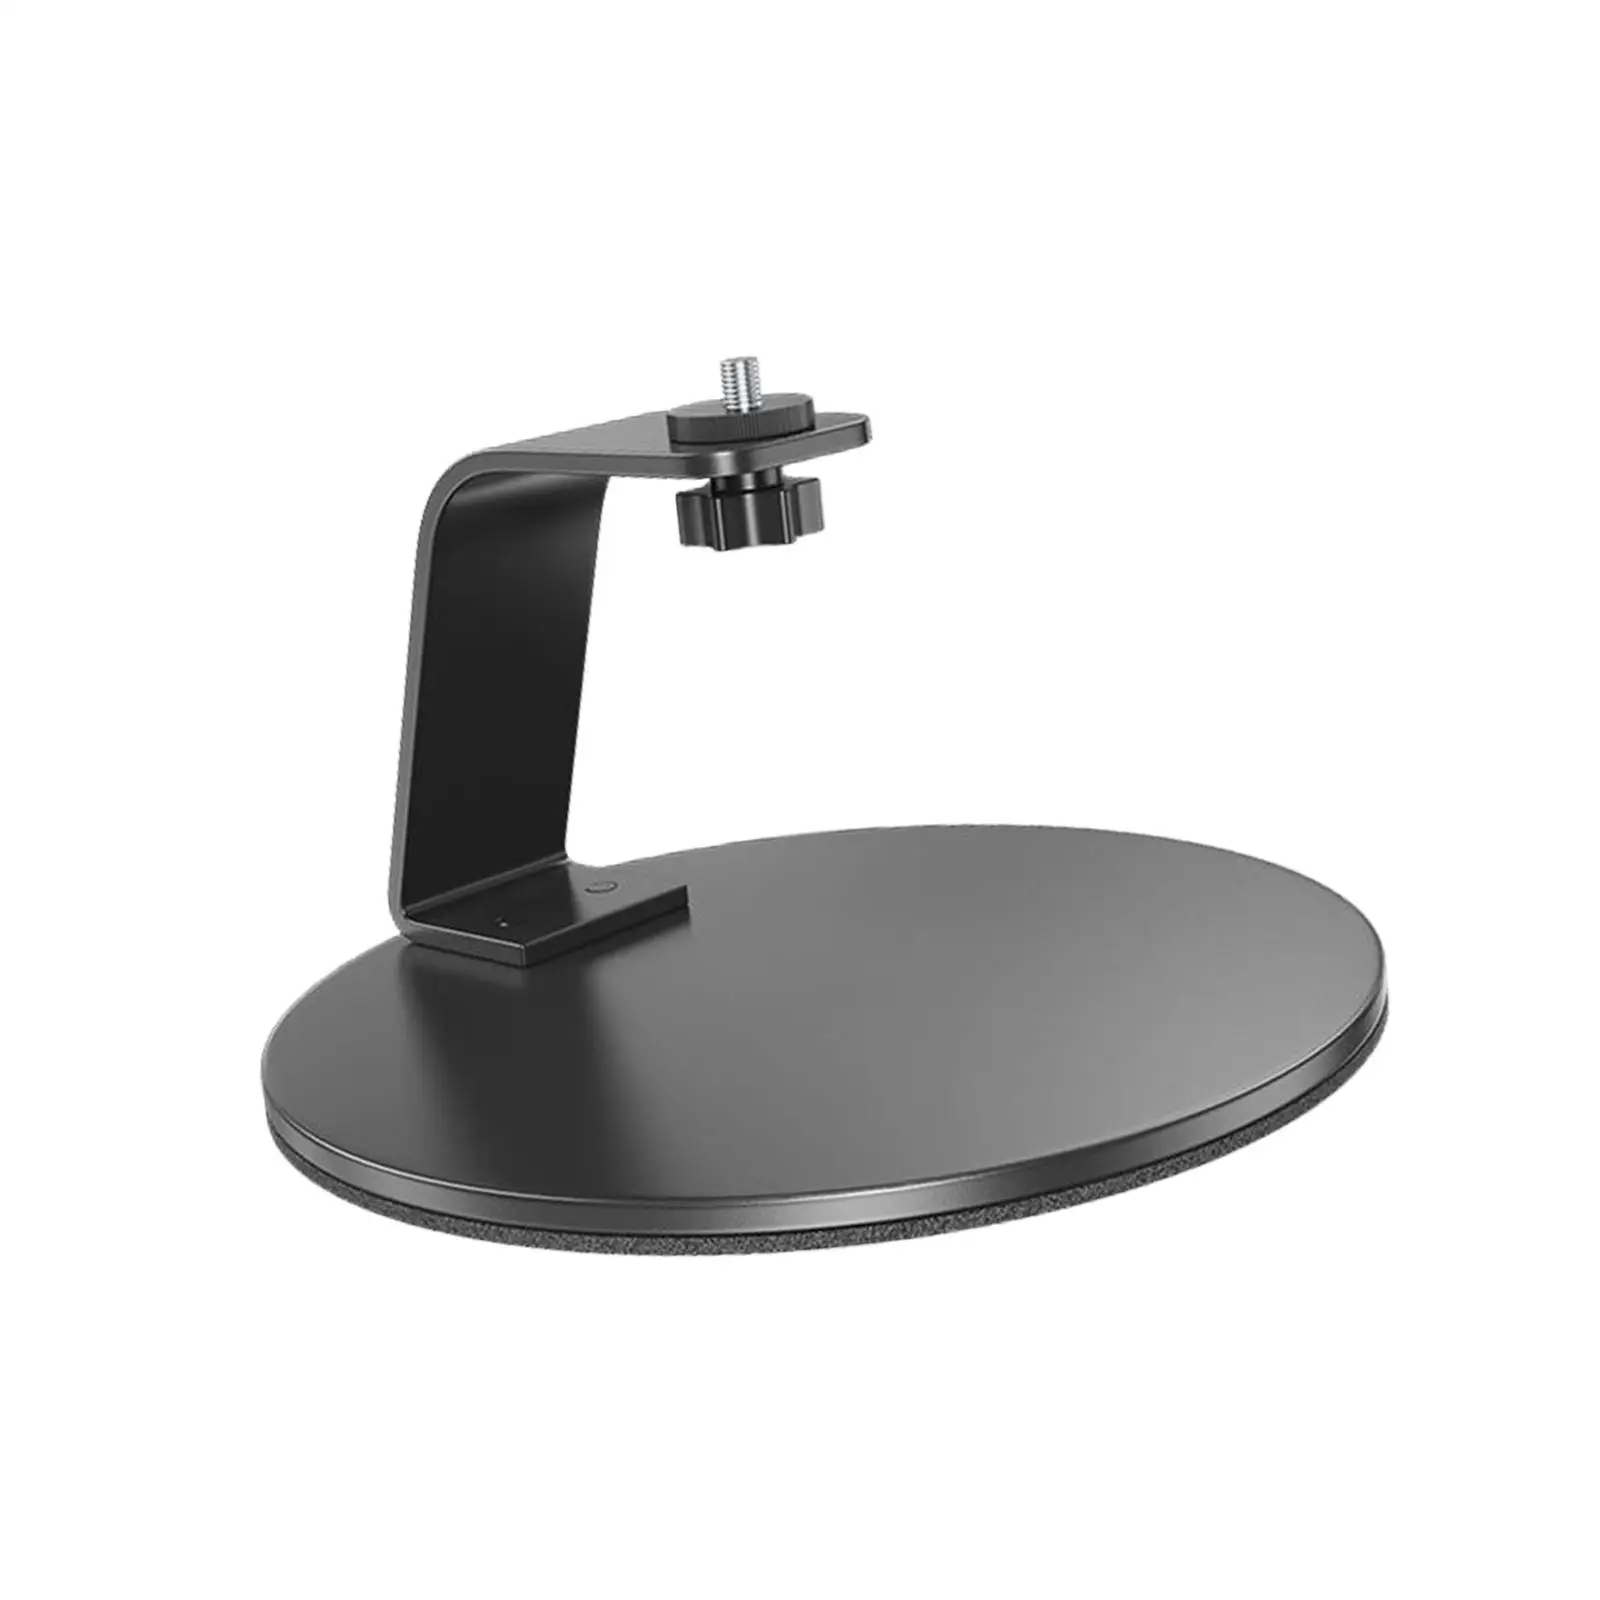 Desktop Projector Stand Accessories 1/4 Screw Interface Mount Stand for Bedside H2 H1 Z6x